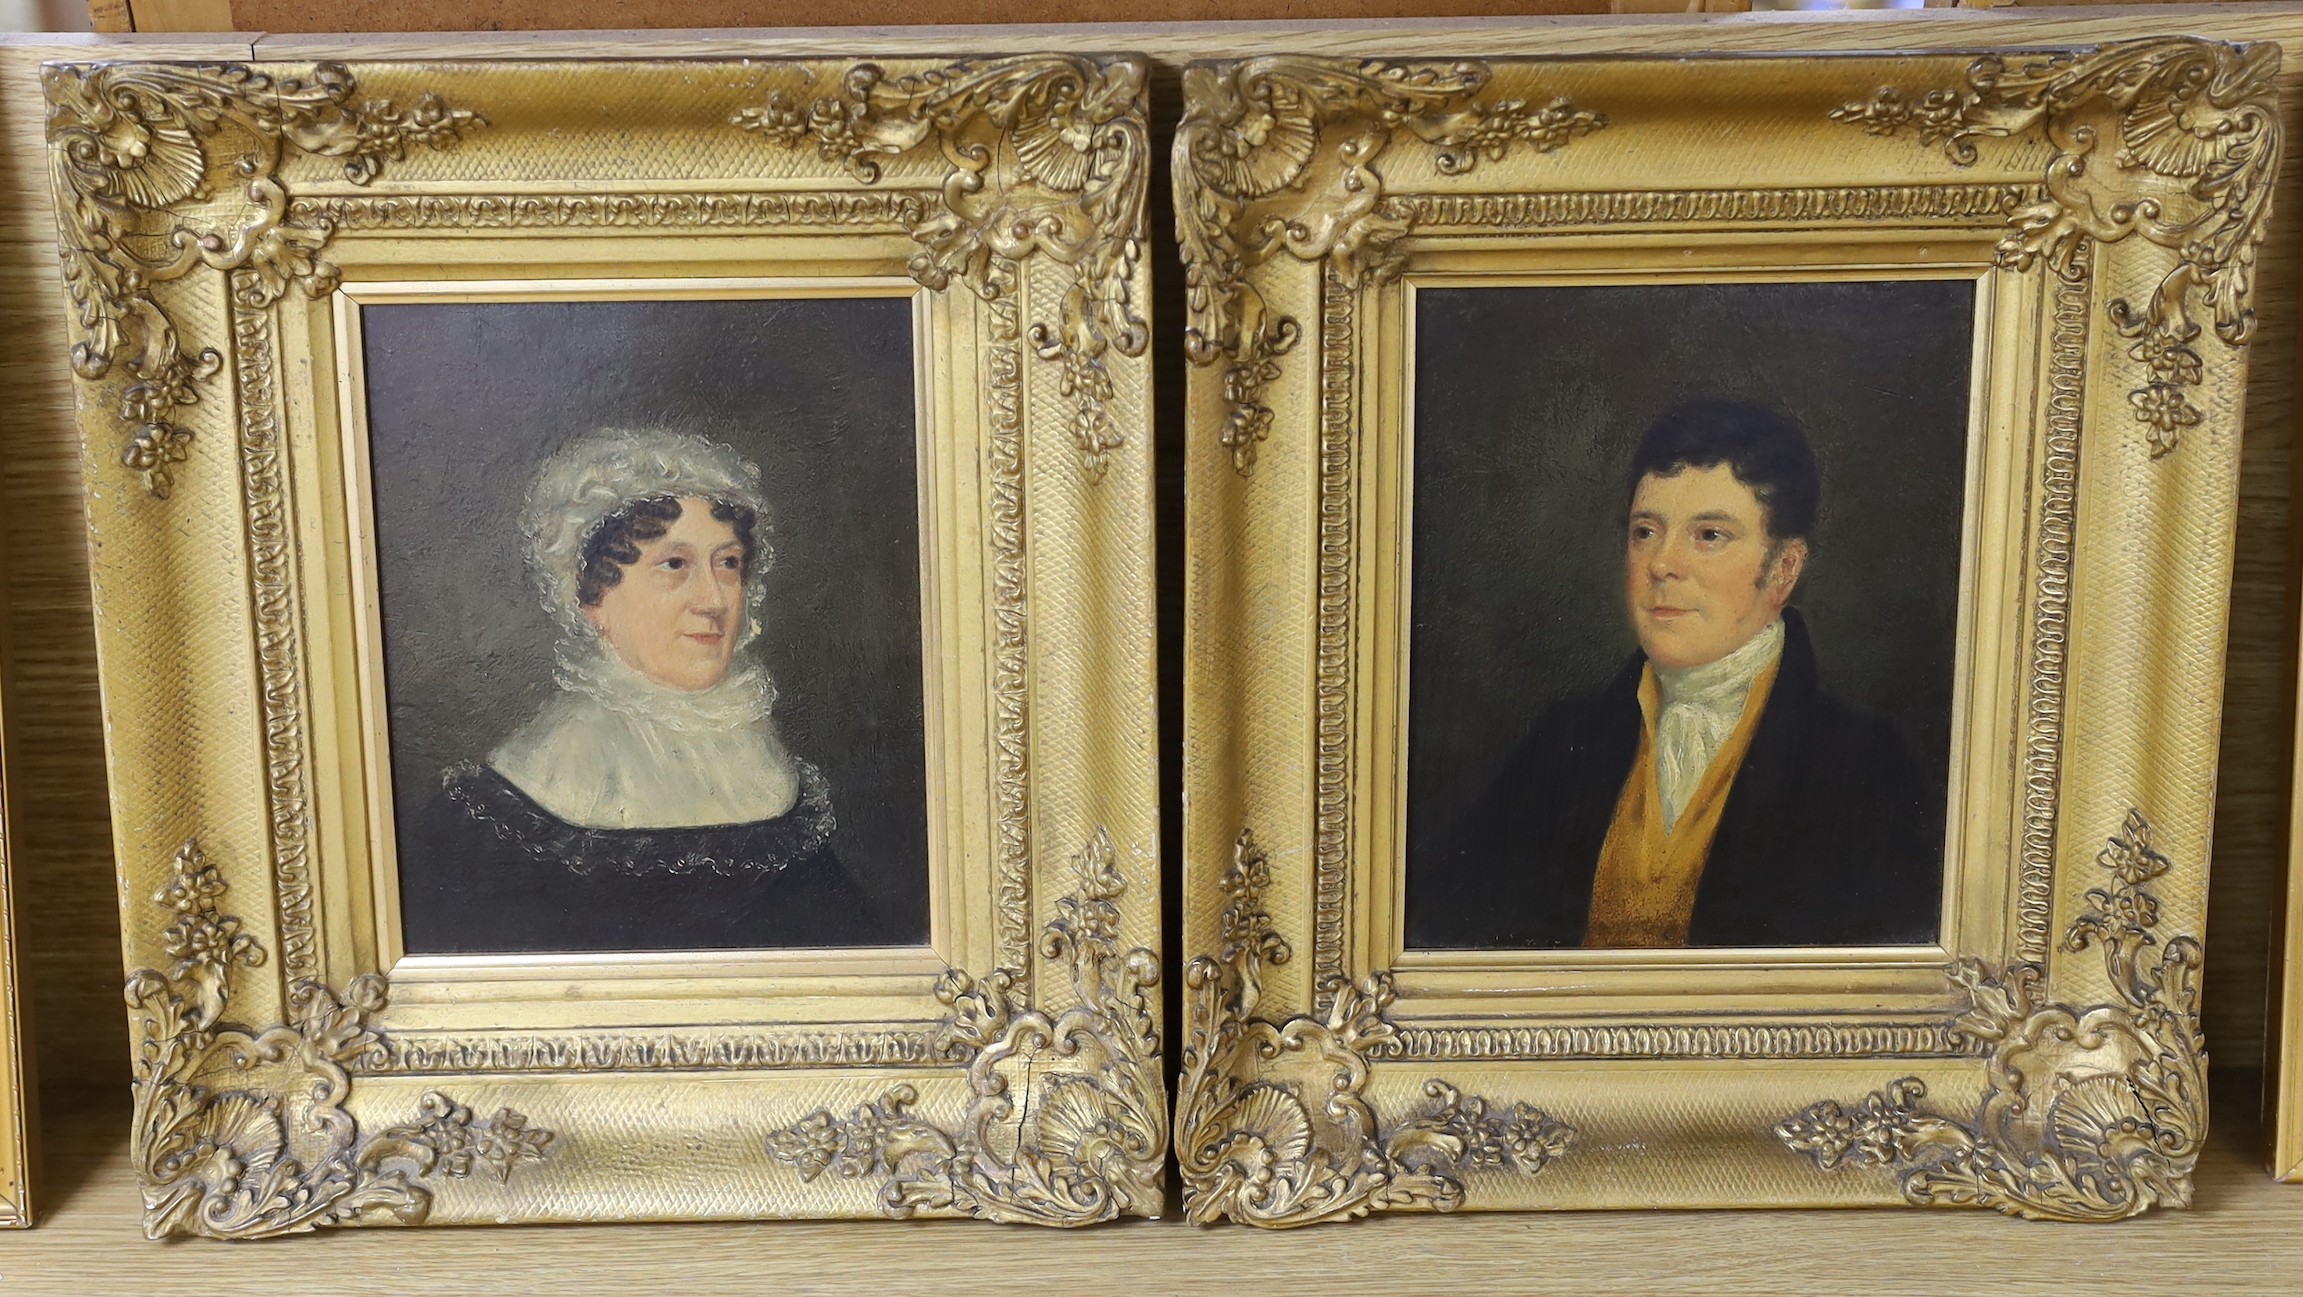 English School c.1850, pair of oils on board, Portraits of a lady and gentleman, 20 x 16cm